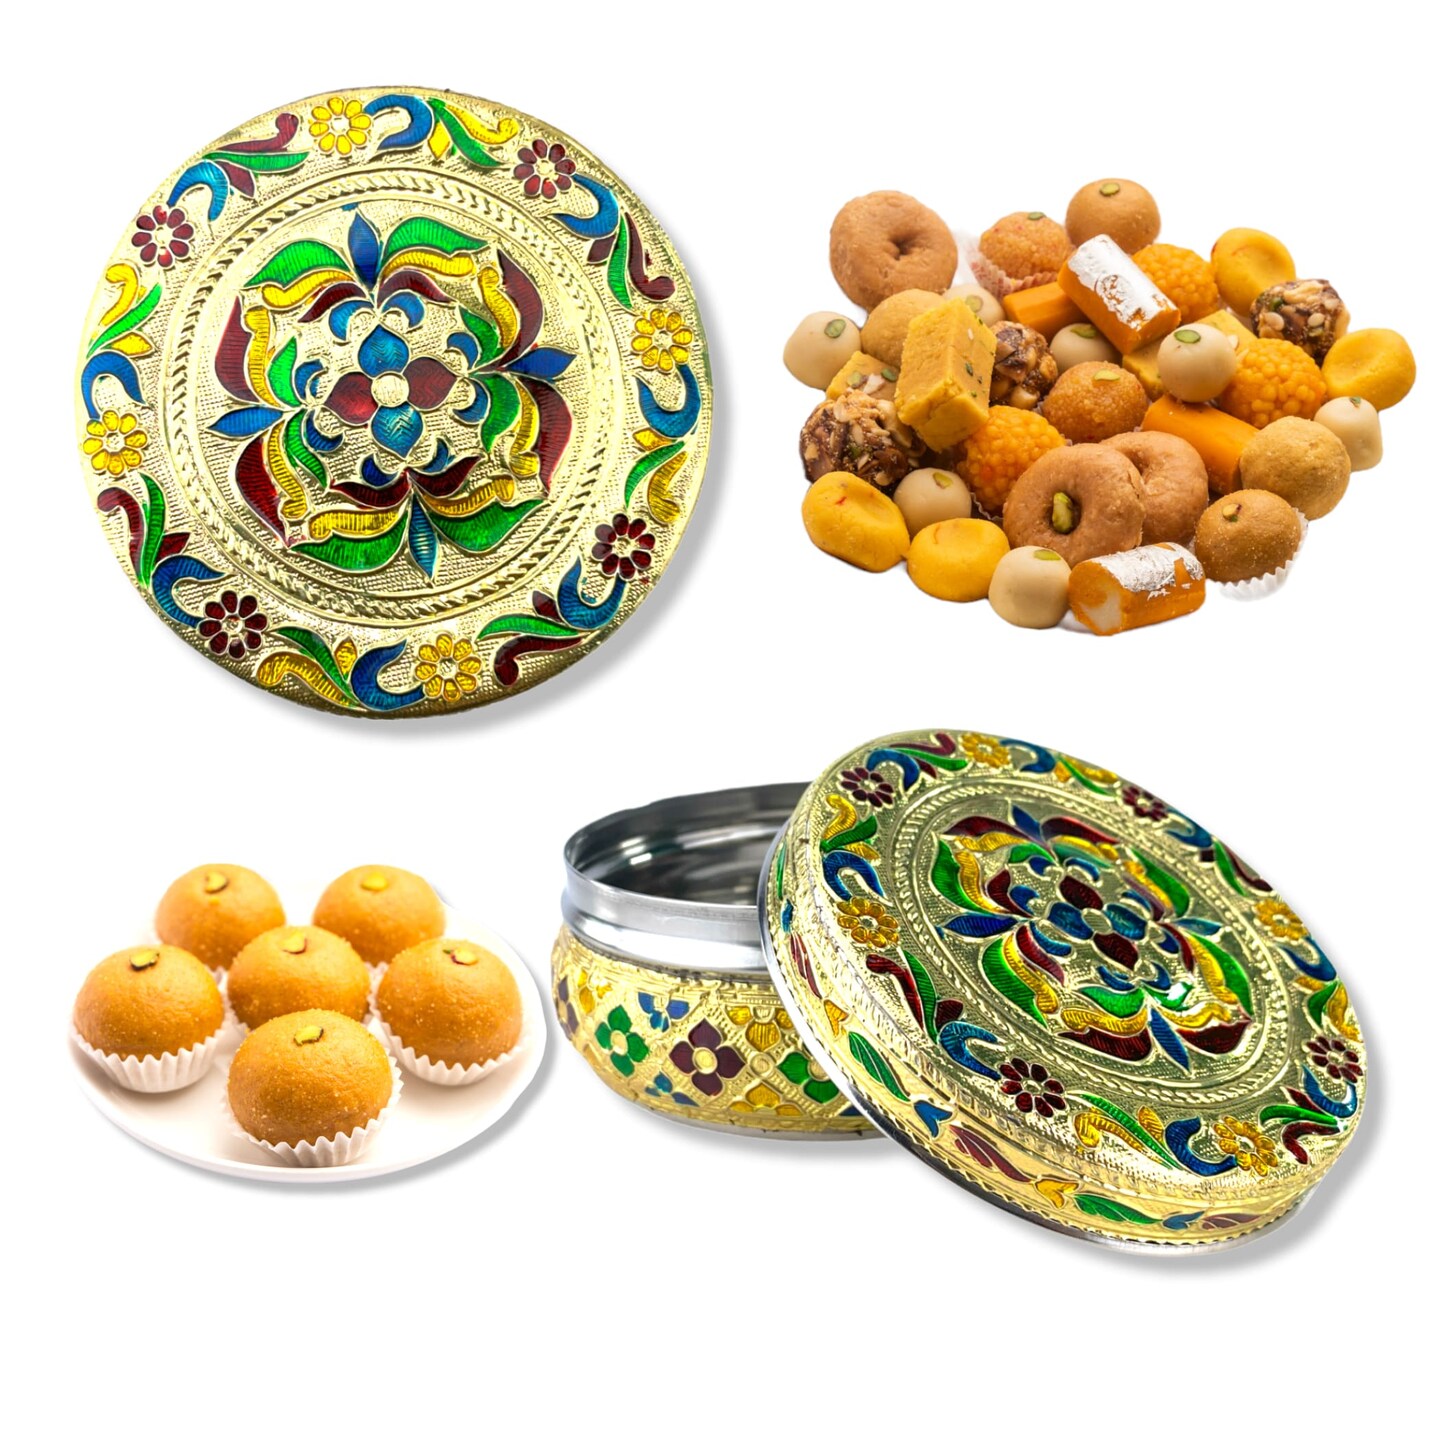 Decorative Sweet Box Stainless Steel Small Round Storage Box Meenakari Container Laddu Box Spice Storage Unique Multipurpose Use Box Gift For Guest